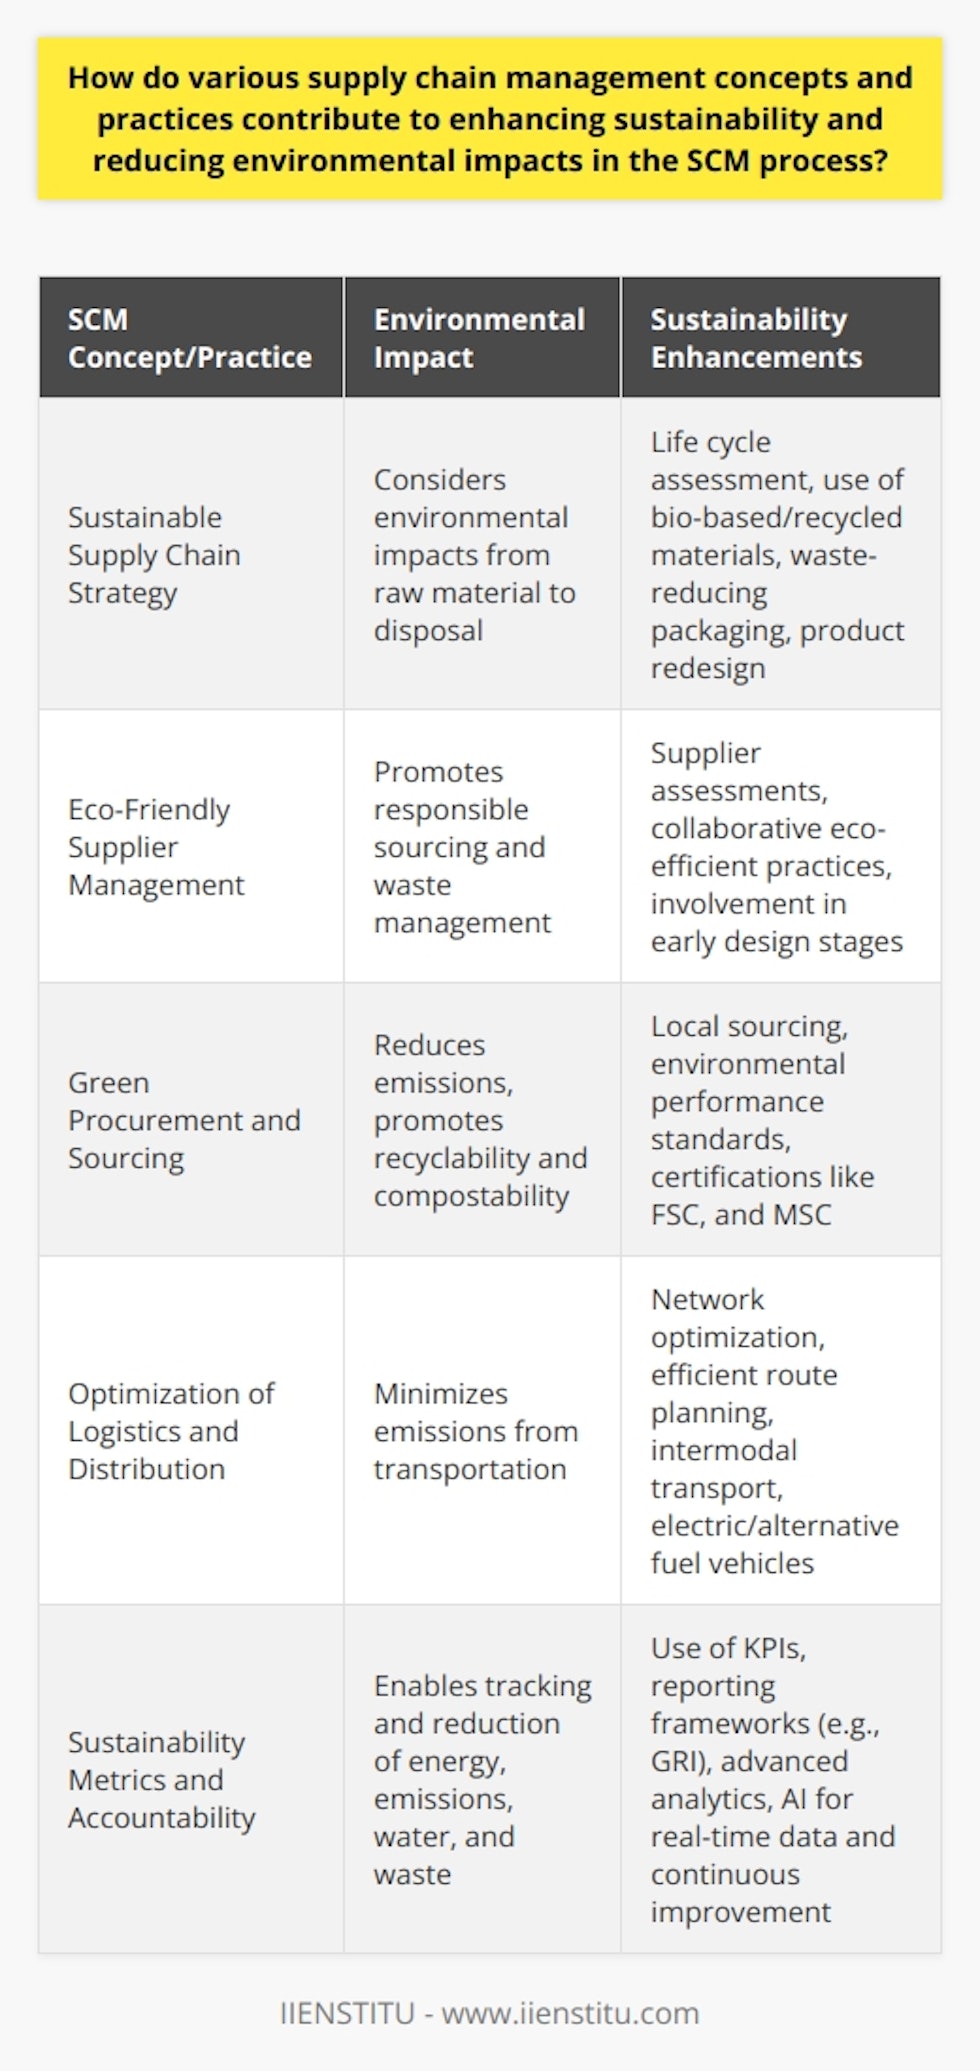 Supply Chain Management (SCM) serves as the backbone of the global economy and its operational practices have profound implications for environmental sustainability. Let's delve into how various SCM concepts and practices can reduce environmental footprints, thereby fostering a more sustainable future.Sustainable Supply Chain StrategyDeveloping an SCM strategy with an emphasis on sustainability is paramount. Companies are increasingly moving towards strategies that consider the environmental impact of every element in their supply chain—from raw material sourcing to end-of-life disposal of products. Through life cycle assessment and cradle-to-cradle models, companies are mapping out the environmental repercussions of their actions and making calculated changes. These adjustments may involve using bio-based or recycled materials, selecting packaging that reduces waste, or even redesigning products to minimize resource use while maintaining functionality.Eco-Friendly Supplier ManagementSuccess in sustainability also comes by selecting suppliers who demonstrate environmental responsibility. Companies are implementing more rigorous supplier assessments that extend beyond cost and delivery times to include environmental management systems, carbon footprint, and waste management policies. Collaborations with suppliers foster a shared value for eco-efficiency and sustainable practices. By involving suppliers early in the product development process, companies can also capitalize on shared expertise to design products with reduced environmental impacts.Green Procurement and SourcingSourcing decisions can either compound or alleviate environmental impacts. Green procurement policies are being implemented to ensure that purchased goods and services meet defined environmental performance standards from production to disposal. These may include sourcing from local suppliers to reduce transportation emissions, opting for products that are easily recyclable or compostable, or demanding certifications such as FSC for paper products or MSC for fishery products.Optimization of Logistics and DistributionEfforts to minimize emissions from transportation are critical in green SCM practices. Companies are optimizing their distribution networks to reduce travel distances, implementing software tools for efficient route planning, or shifting to intermodal transport methods that combine shipping, rail, and road transport for better fuel efficiency. Increased use of electric vehicles or other alternative fuels in their fleets, and exploration of innovative delivery methods, such as autonomous vehicles or bicycles for last-mile delivery, are stepping stones towards a smaller carbon footprint.Sustainability Metrics and AccountabilityLastly, measuring and reporting on environmental performance against well-defined sustainability KPIs ensure that companies are accountable for their impact. Metrics may track energy consumption, greenhouse gas emissions, water usage, and the percentage of waste recycled. Reporting frameworks like the Global Reporting Initiative (GRI) enable companies to report their environmental performance transparently, allowing stakeholders to make informed decisions. Advanced analytics and AI are increasingly being used to provide real-time data and insights to drive continuous improvement in sustainability performance.By embracing these supply chain concepts—sustainable design, conscientious supplier selection, green procurement, efficient logistics, and rigorous performance measurement—companies can contribute to the global sustainability agenda. These practices enable organizations not only to mitigate their adverse environmental impacts but also to enhance their competitive advantage, reputation, and long-term viability in an increasingly eco-conscious market.Such an integrated approach requires continuous learning and adaptation. For those wanting to gain in-depth insights into sustainable SCM, institutions like IIENSTITU offer courses that blend the latest industry practices with environmental stewardship, equipping professionals with the tools needed to drive sustainable change in their organizations' supply chains.